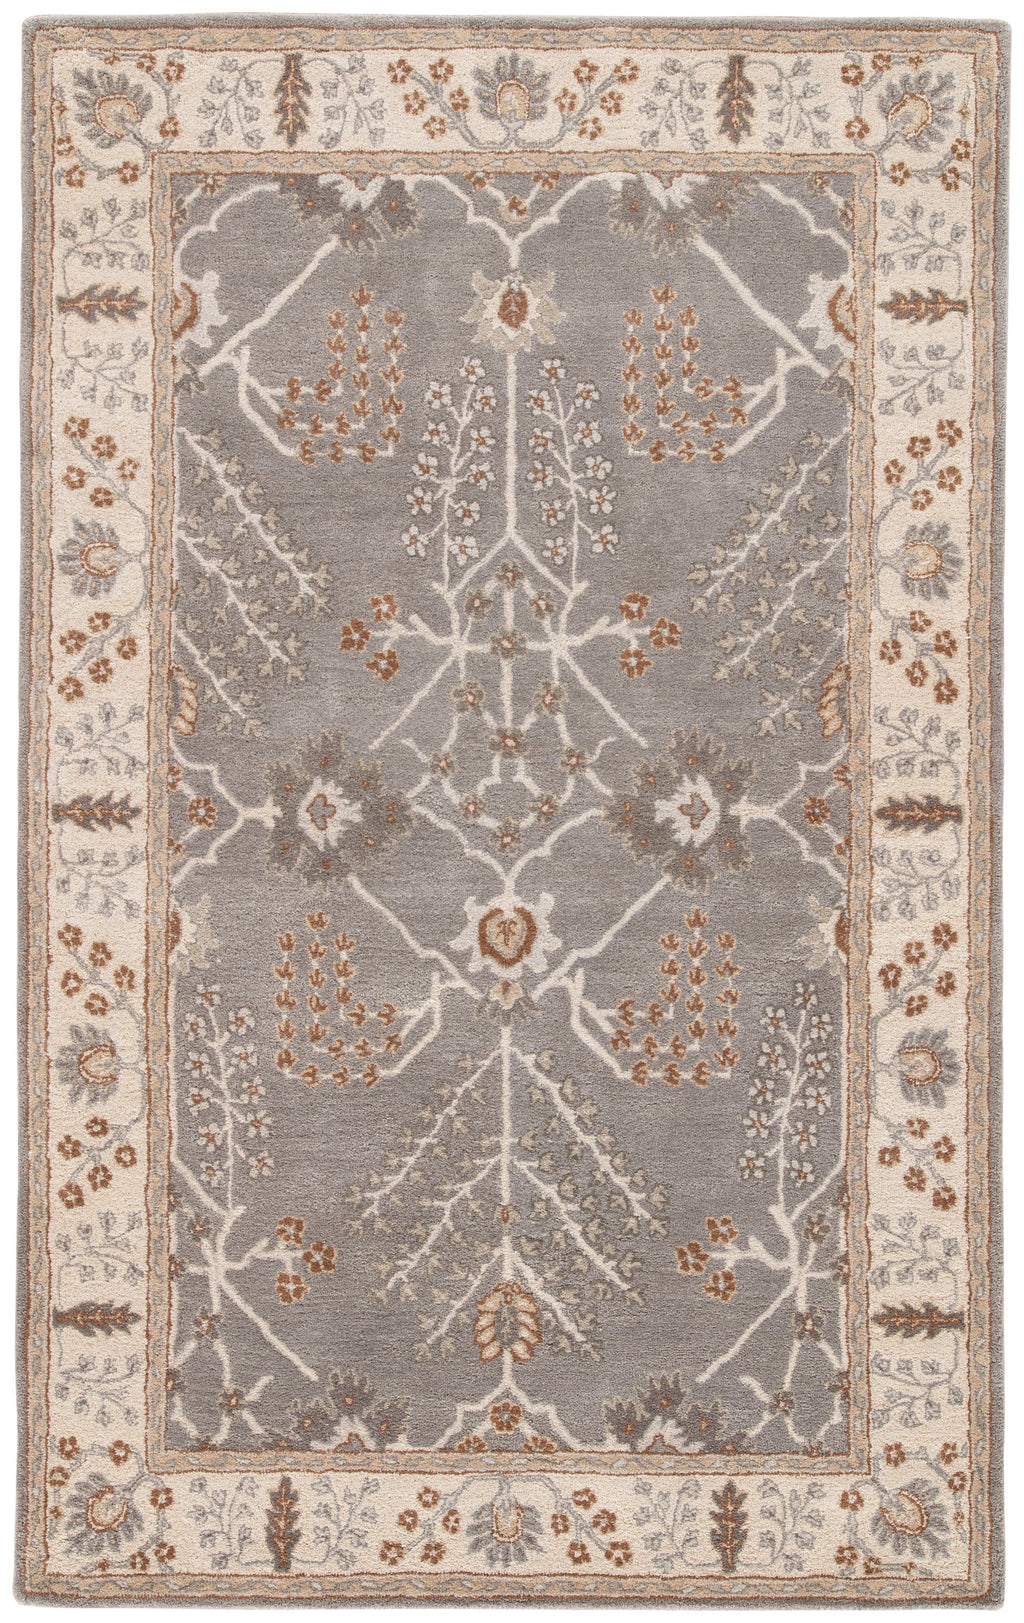 Chambery Floral Rug in Charcoal Gray & Rainy Day design by Jaipur Living